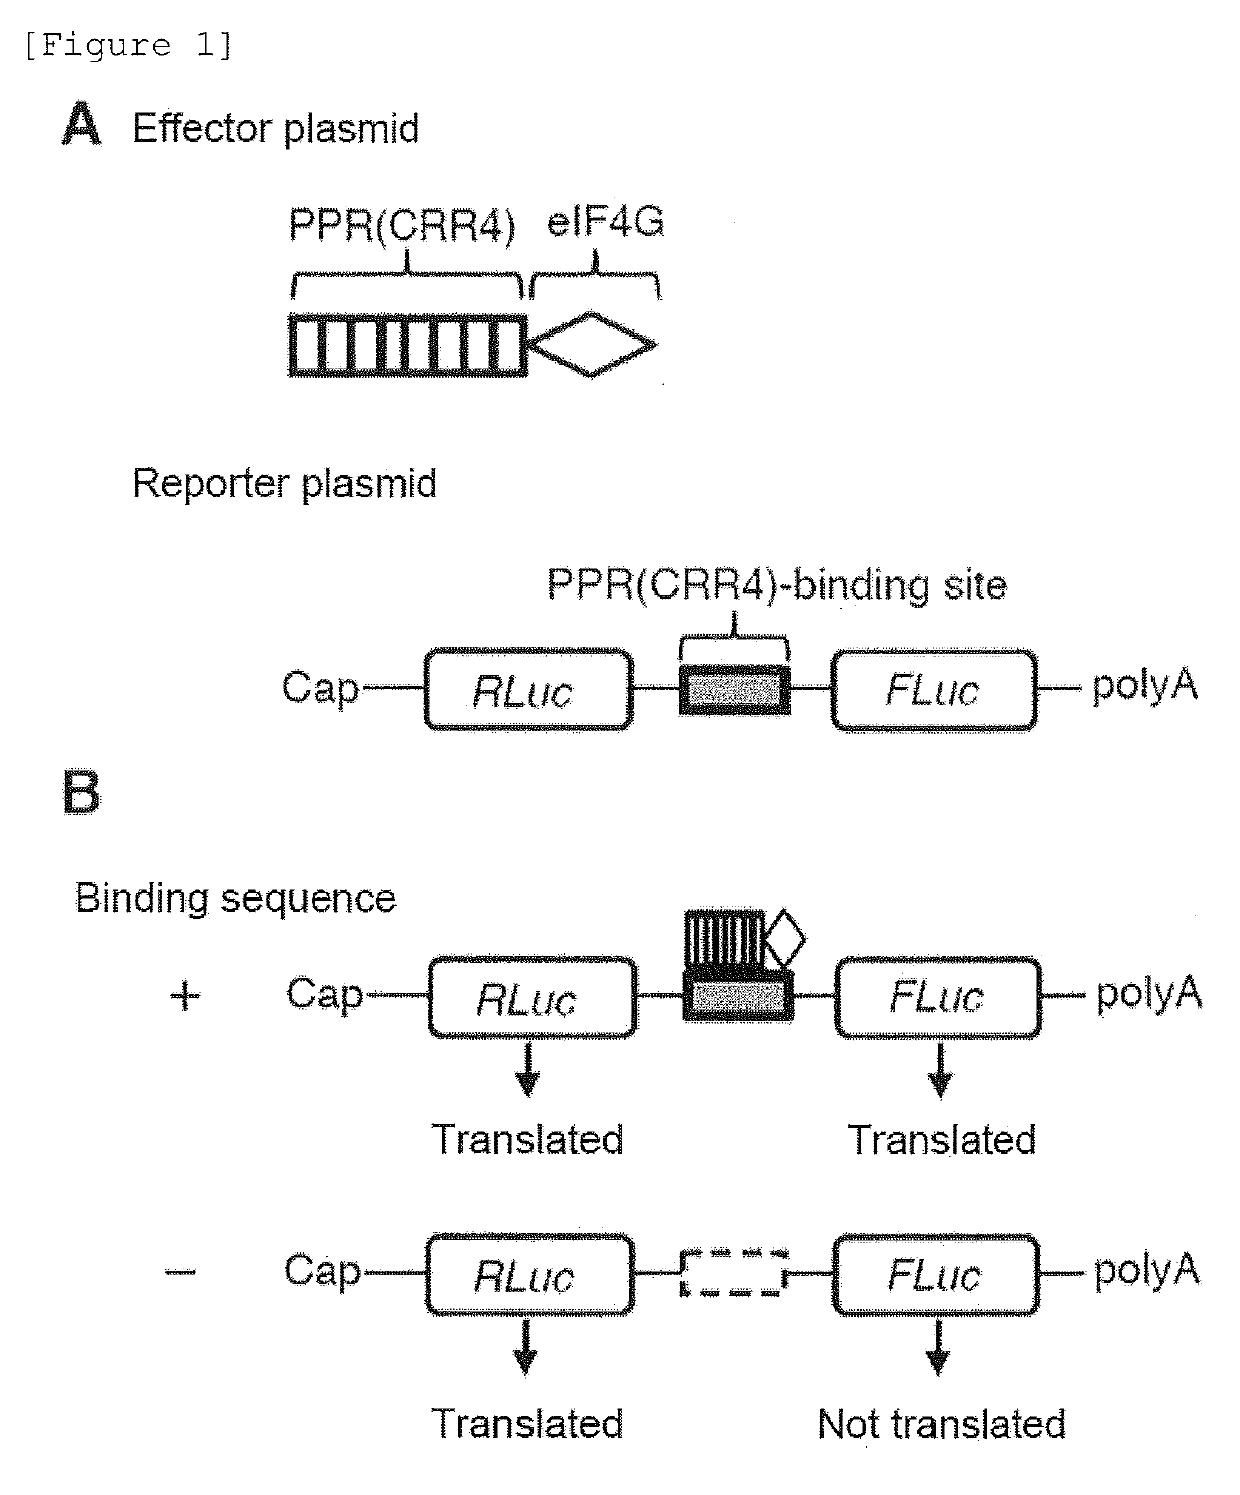 FUSION PROTEIN FOR IMPROVING PROTEIN EXPRESSION FROM TARGET mRNA